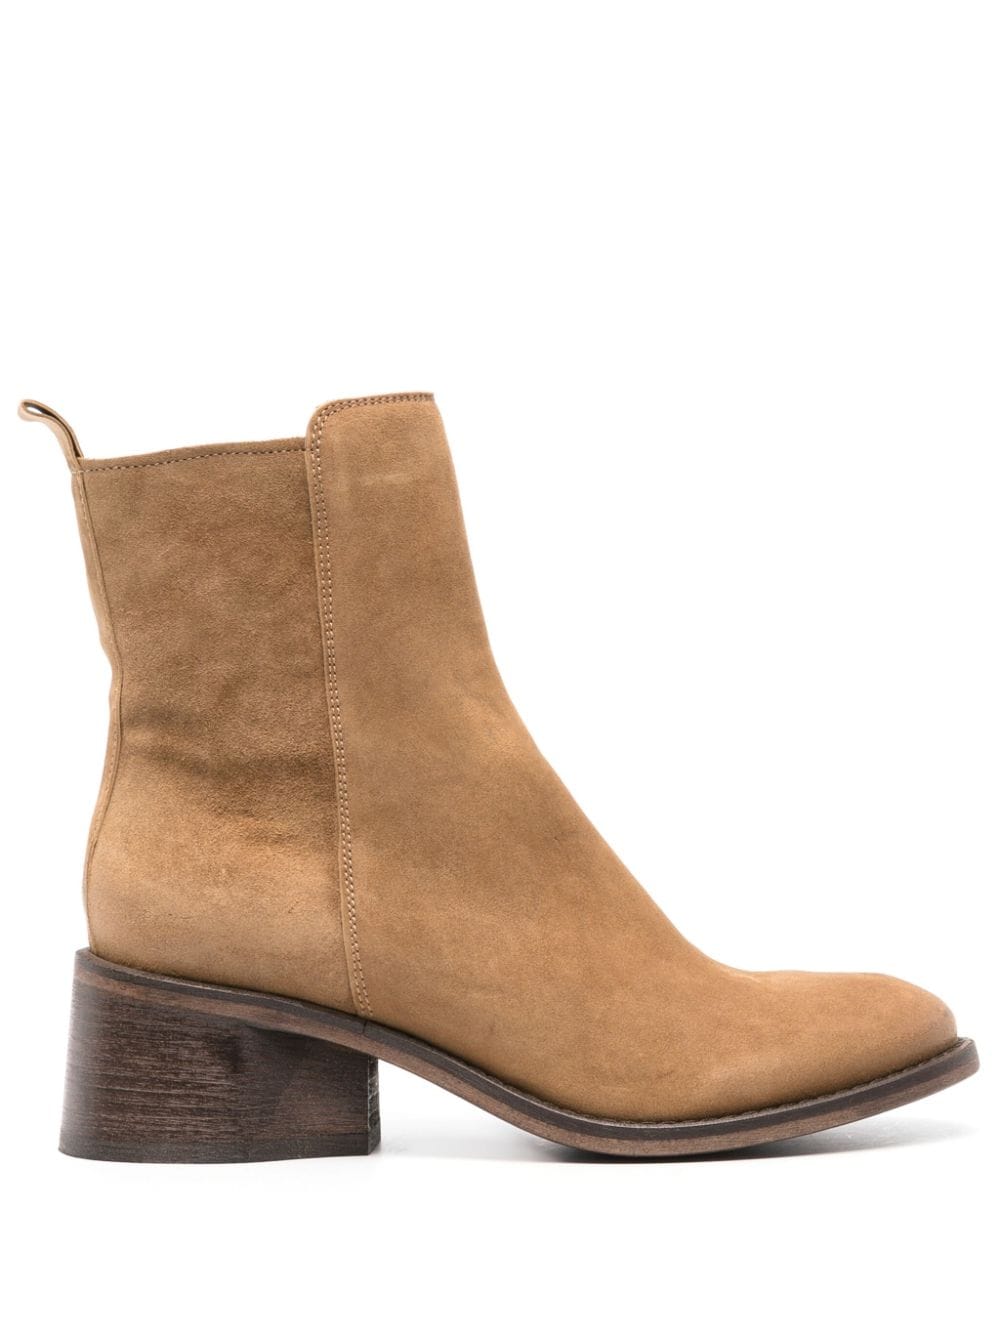 Moma suede leather ankle boots - Neutrals von Moma